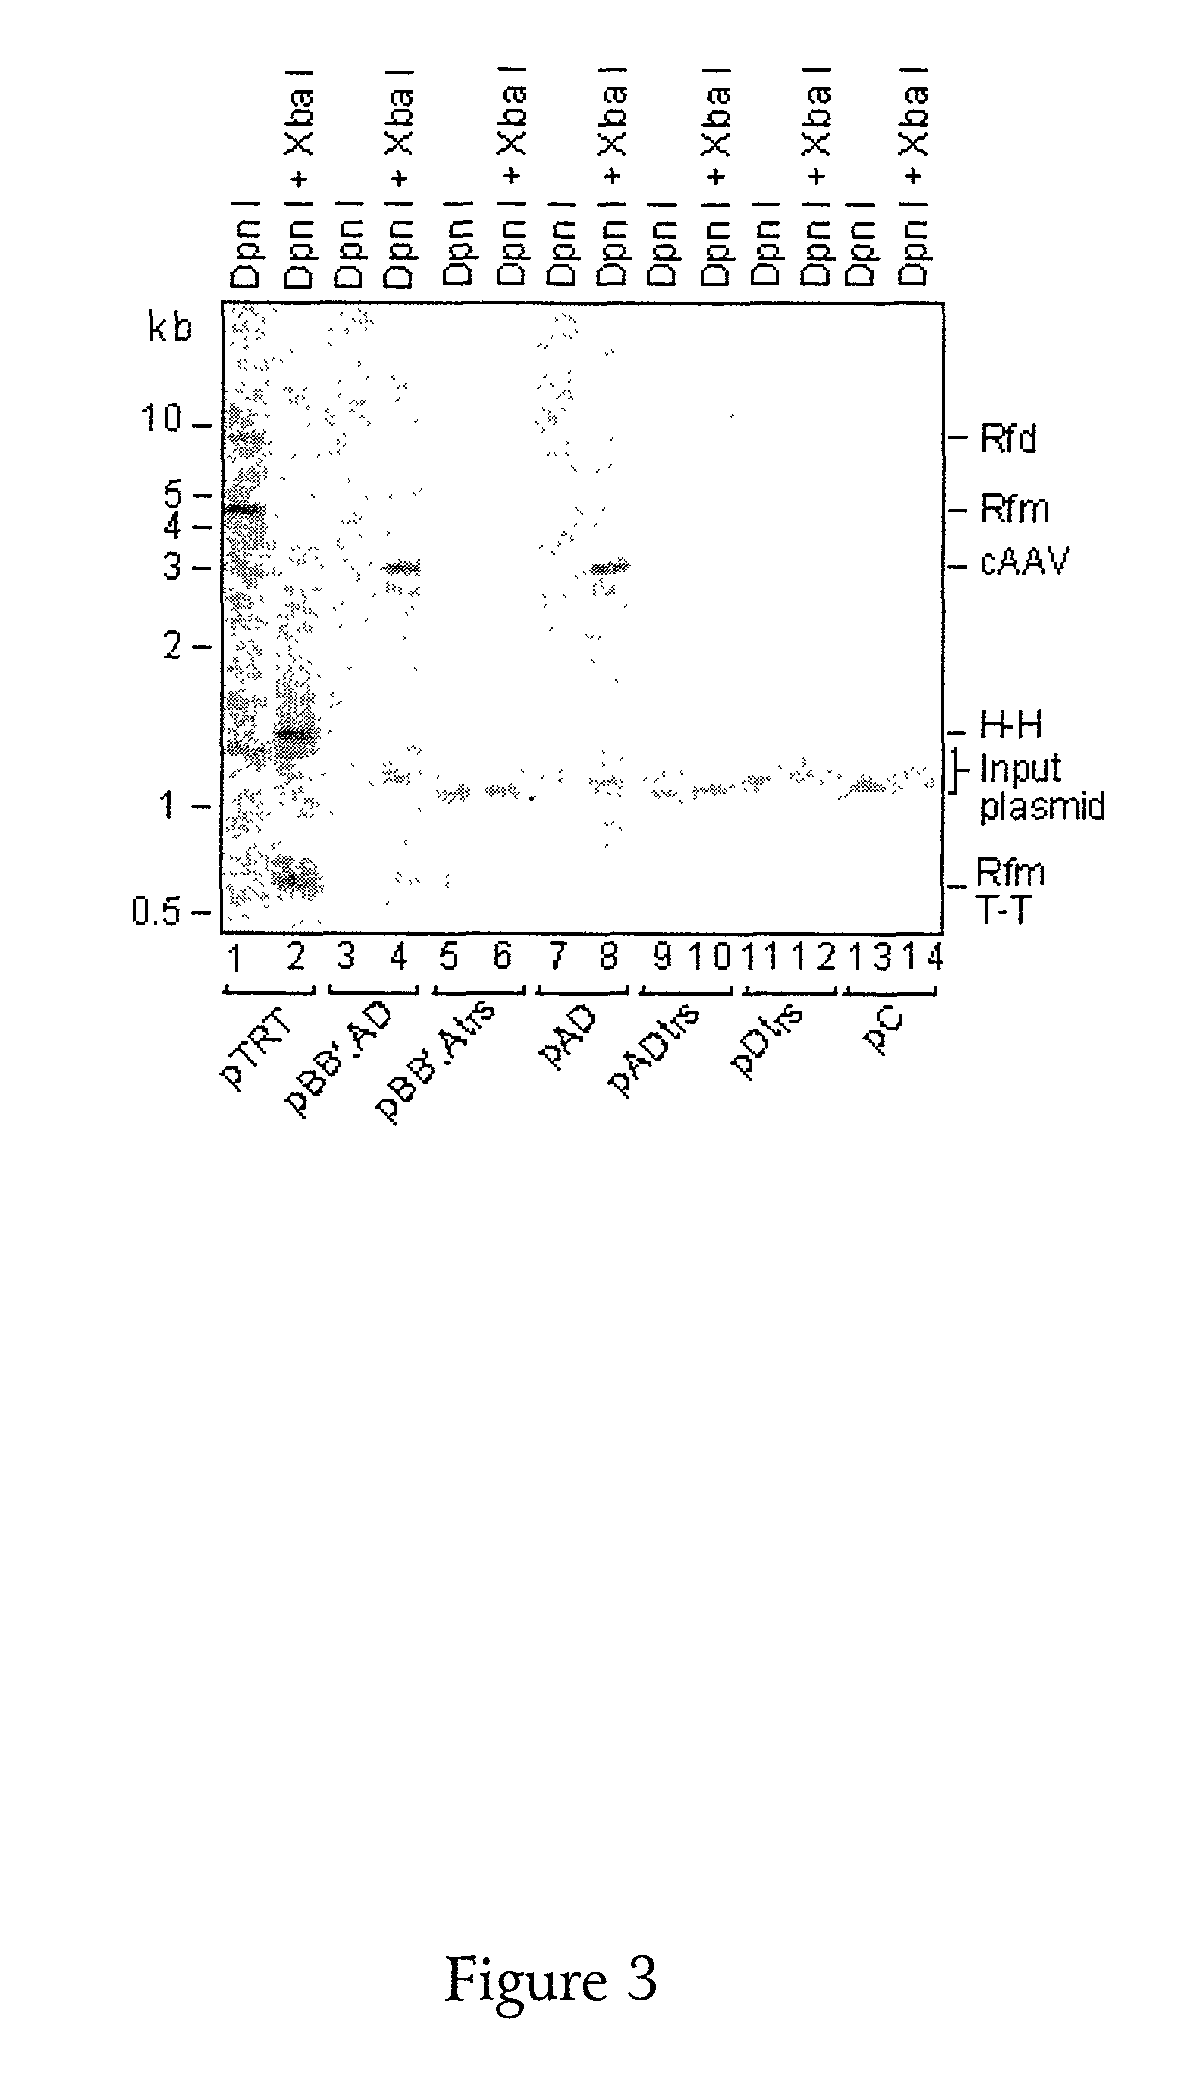 Method for generating replication defective viral vectors that are helper free